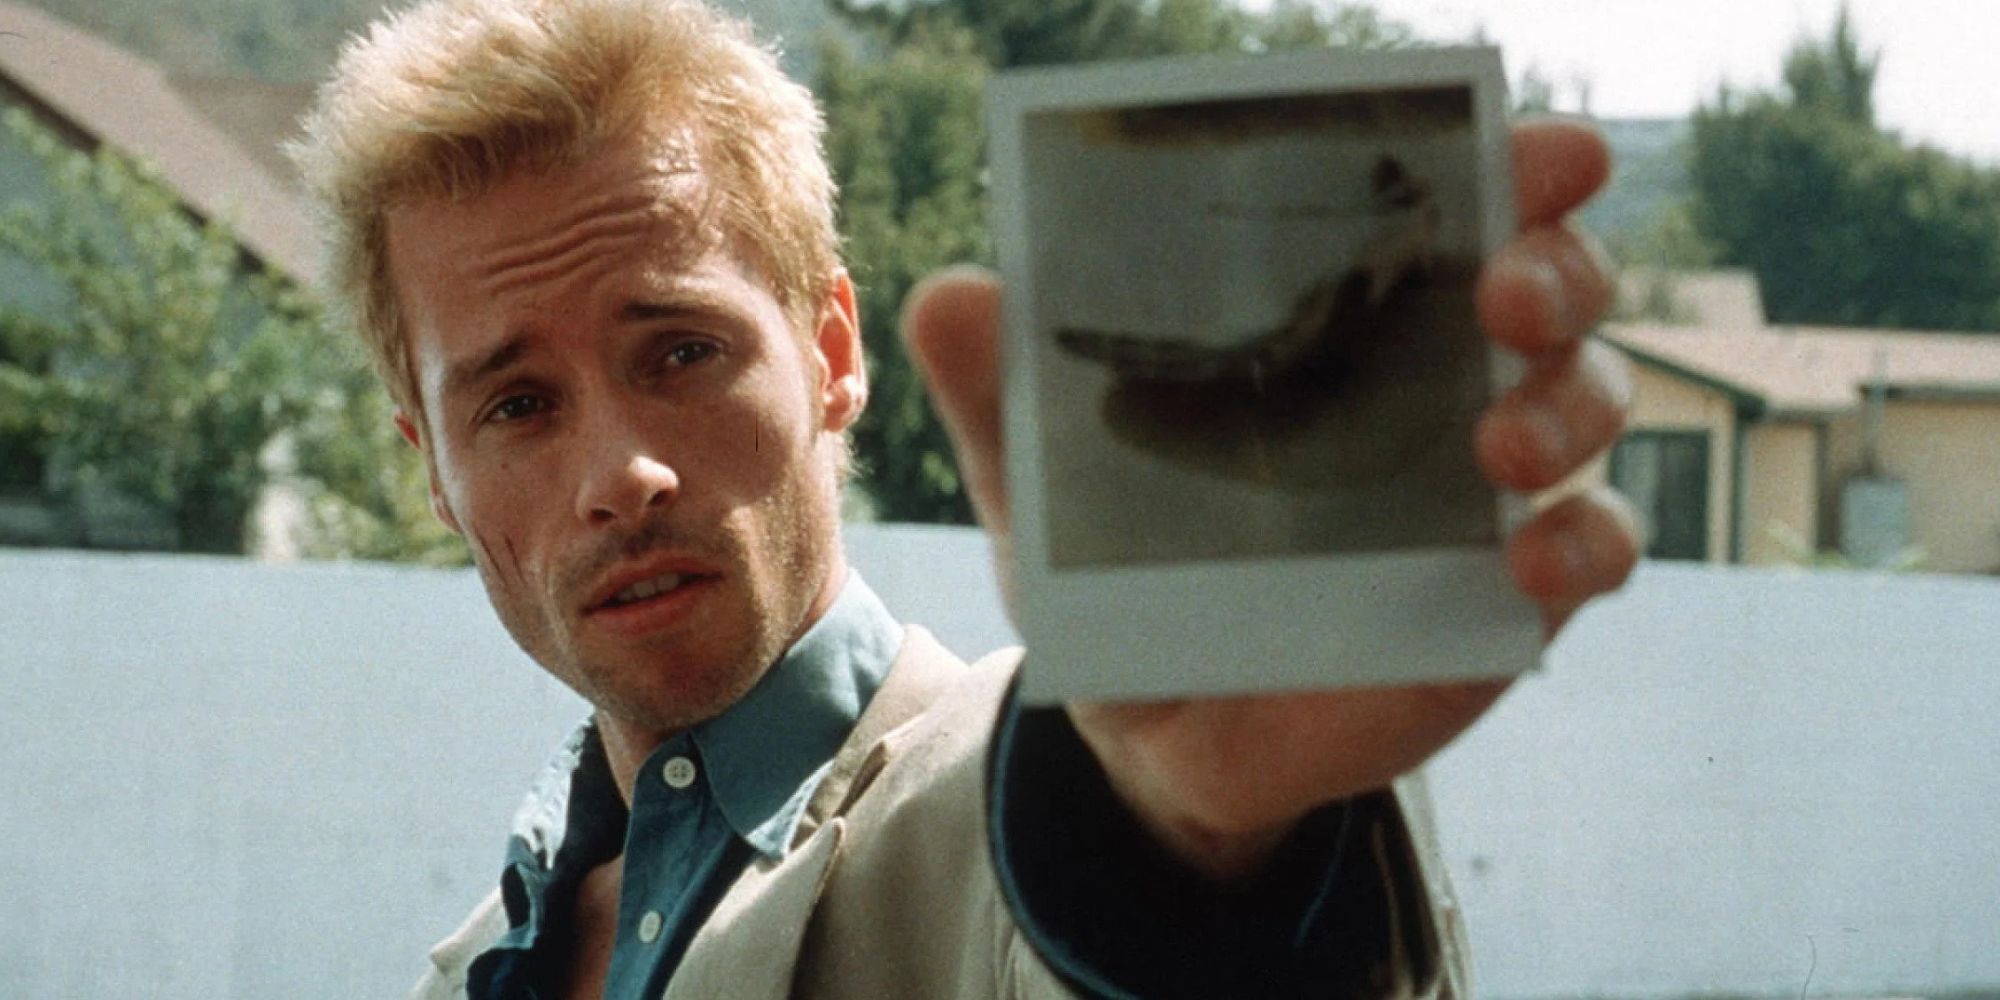 Guy Pearce holding out a polaroid photograph in 'Memento'